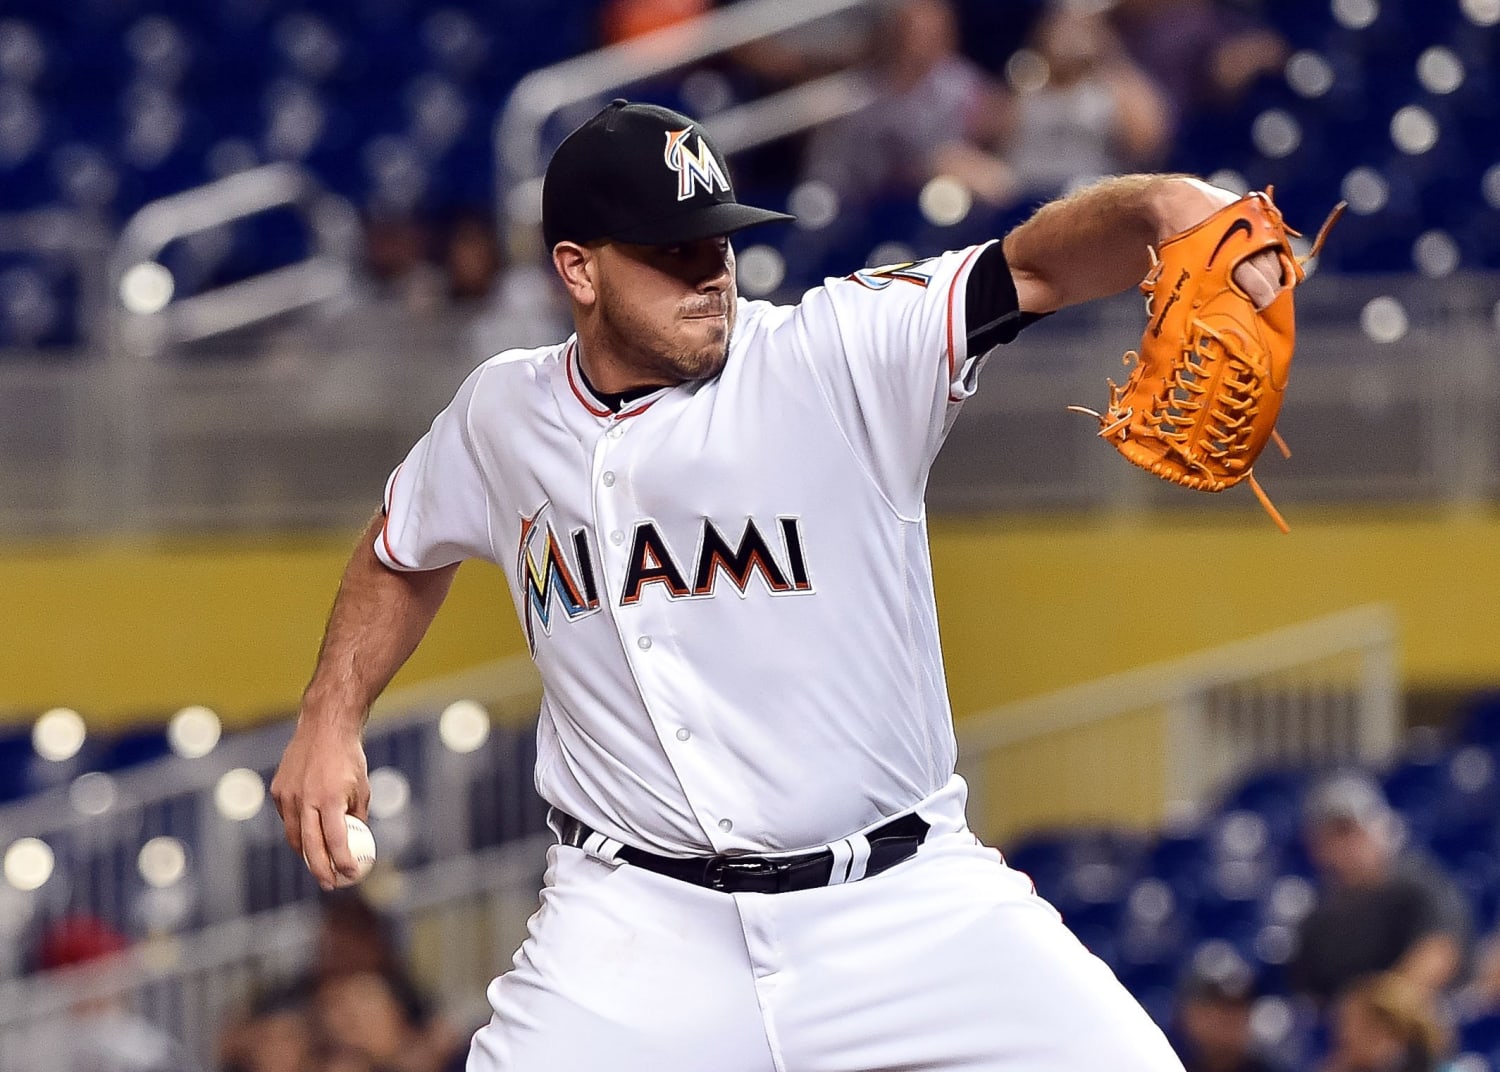 Miami Marlins Pitcher José Fernández Killed in Boating Accident